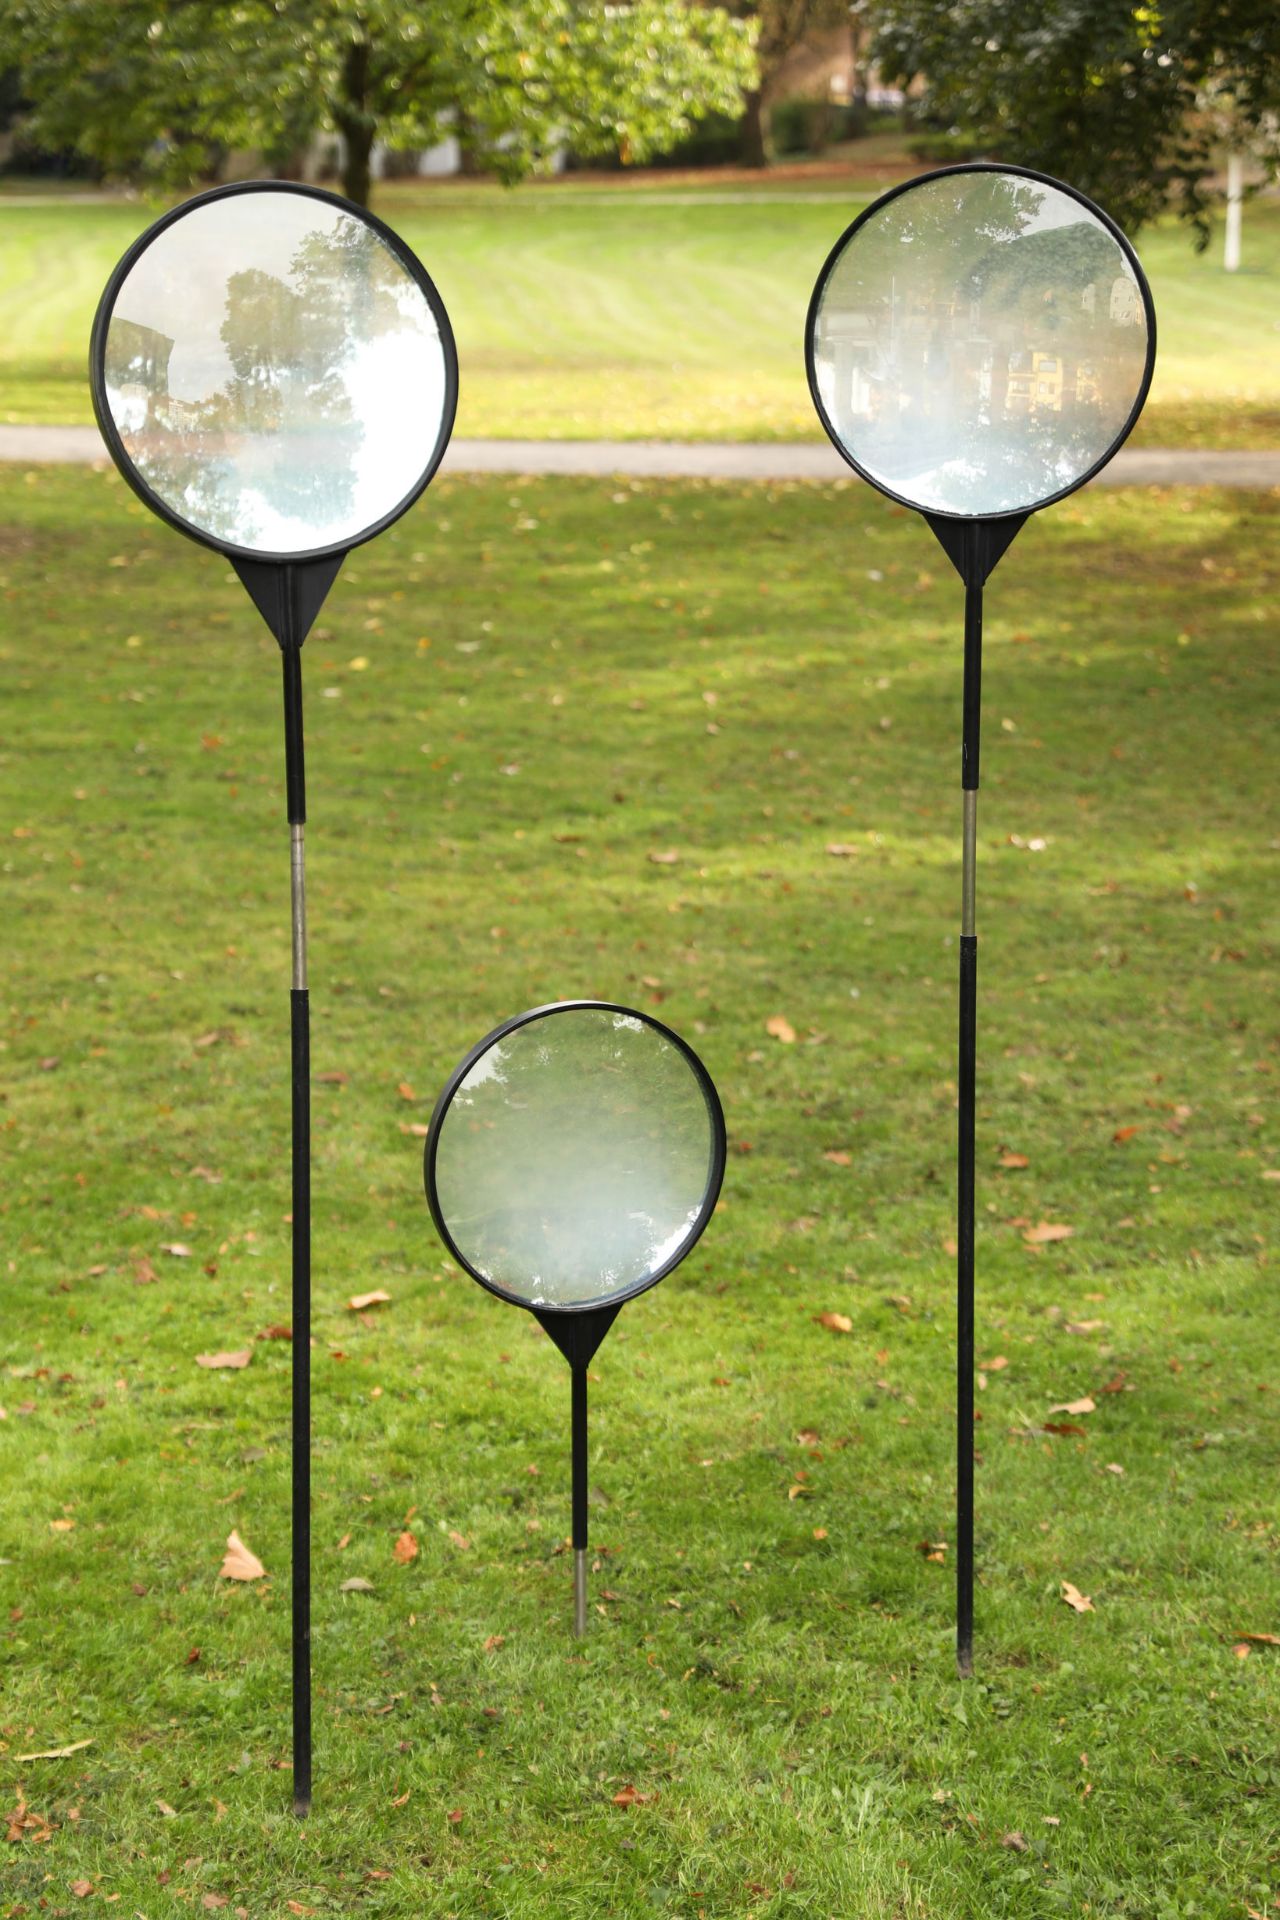 Adolf Luther*, 3 standing lenses for outdoor use, 1979